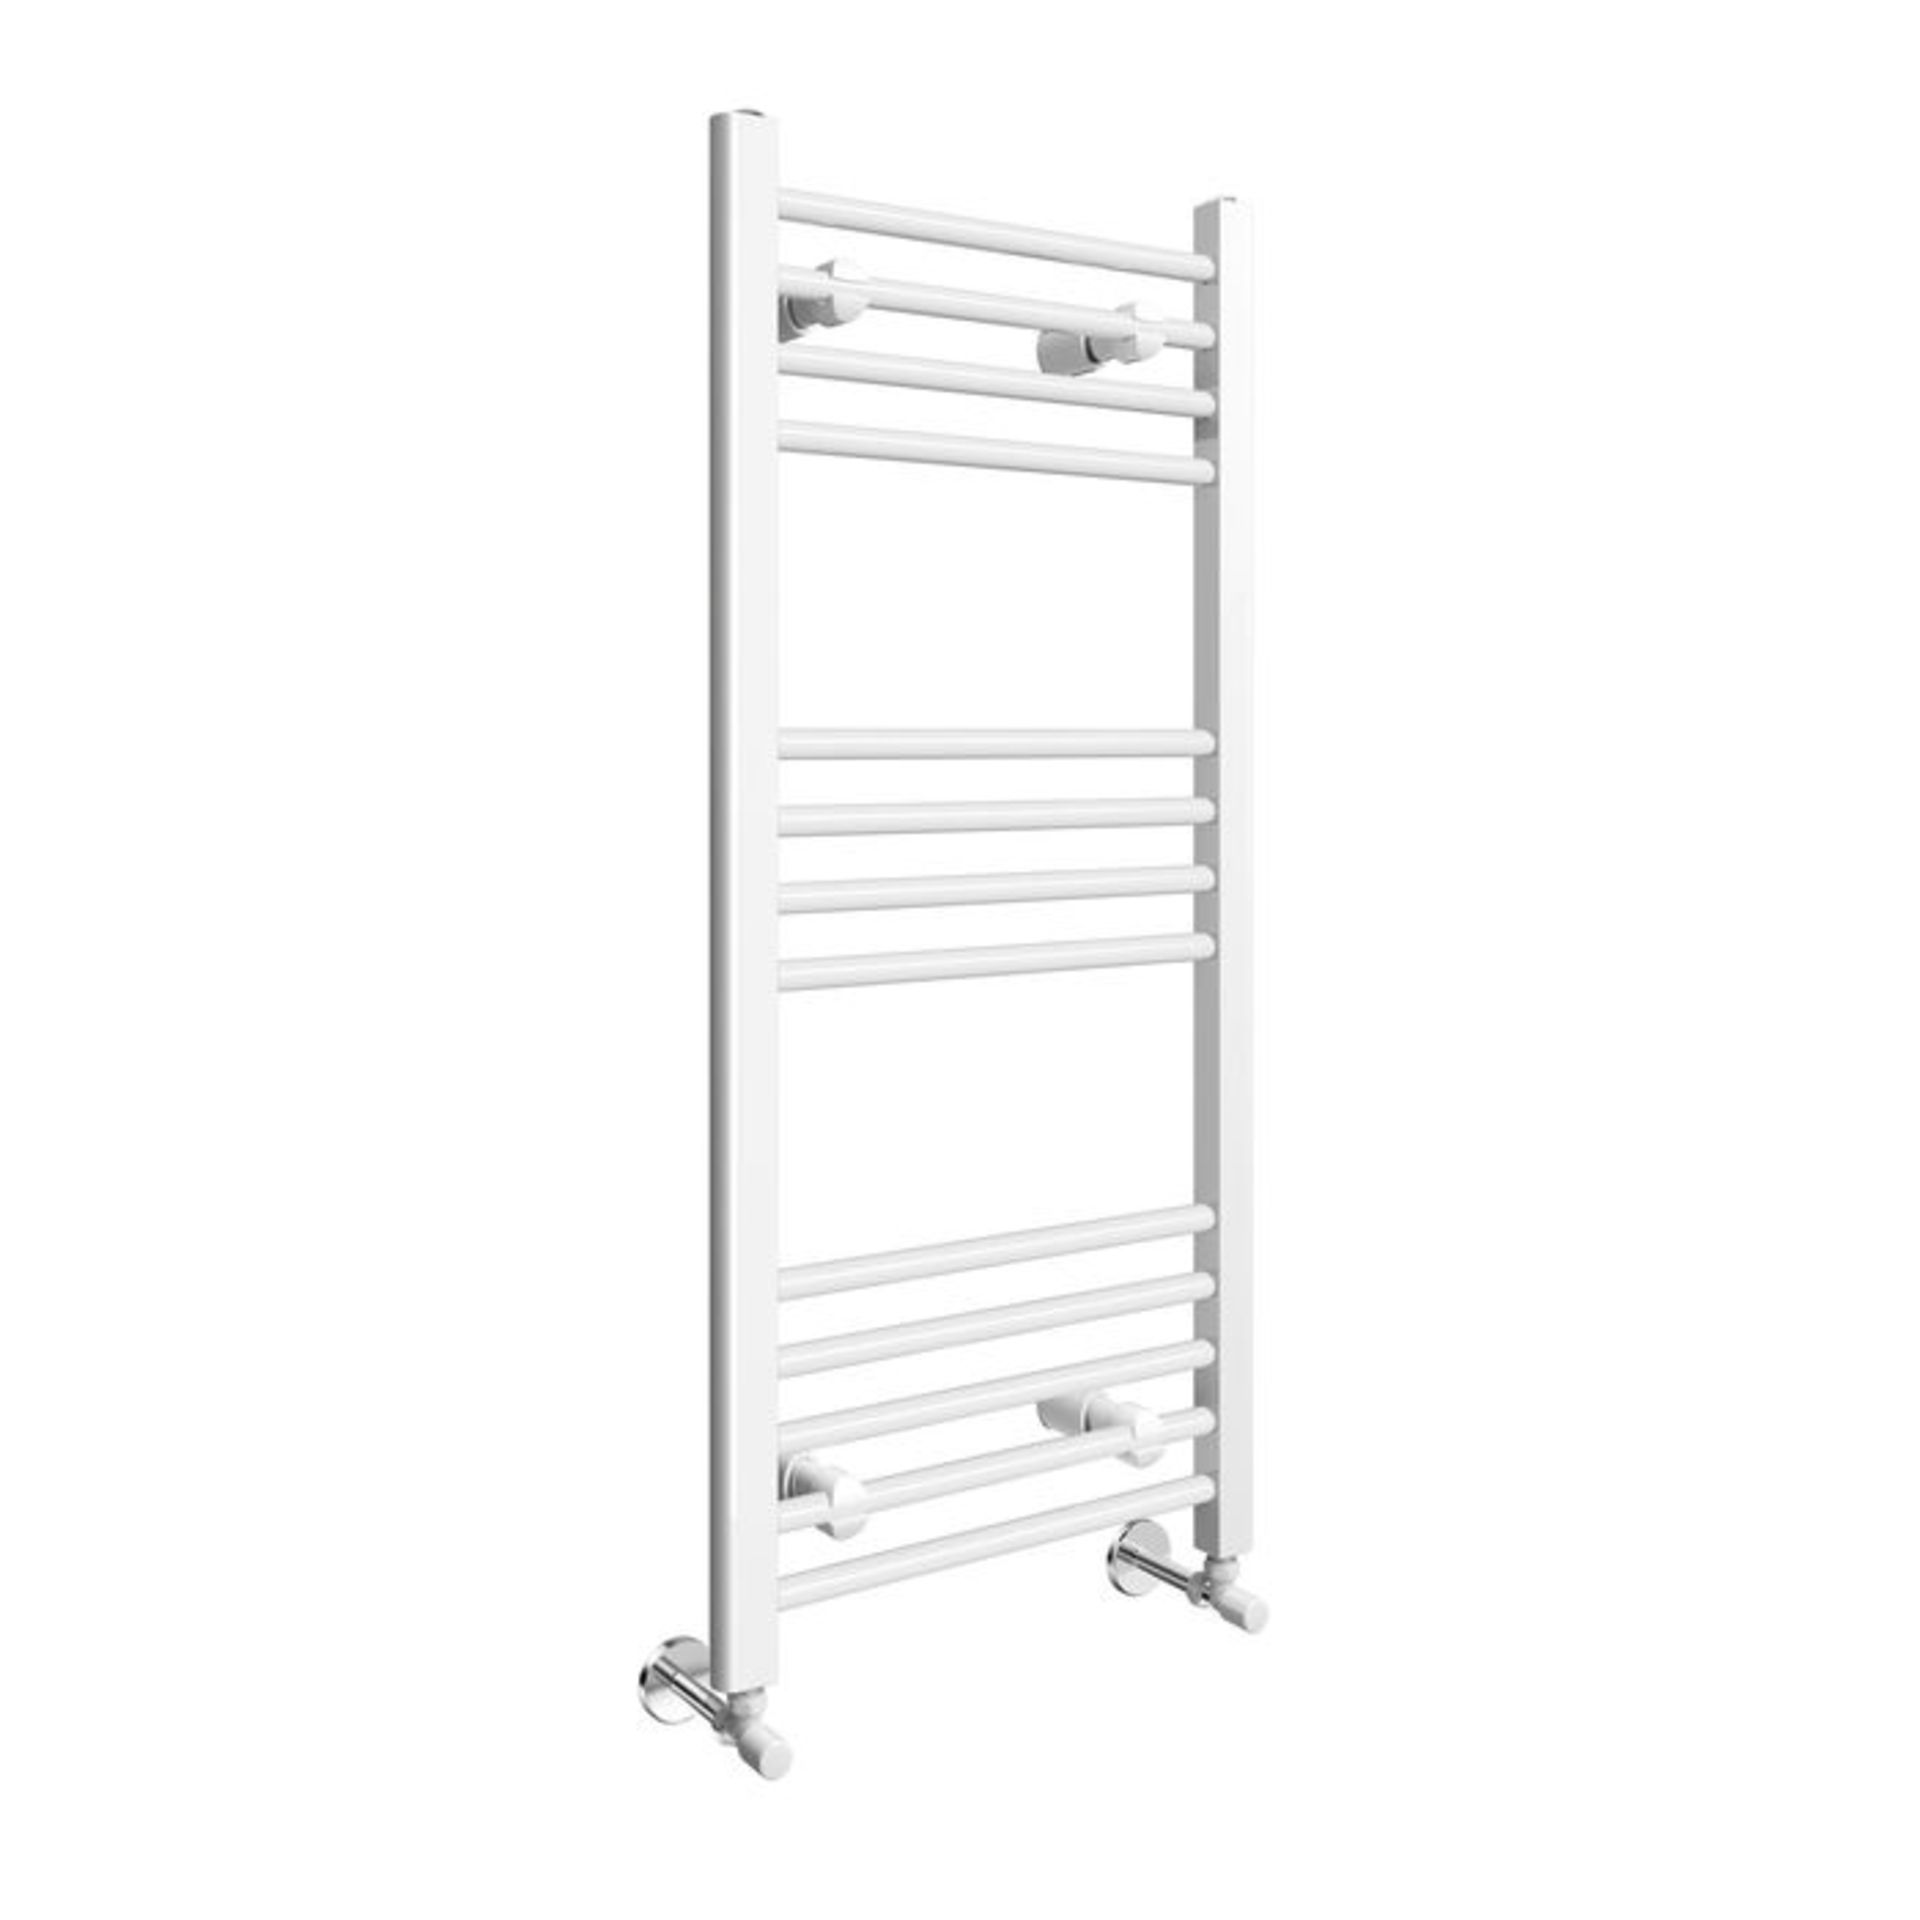 (RR22) 1000x450mm White Basic Towel radiator High gloss White. RRP £165.99. Made from low-carb...(( - Image 3 of 3